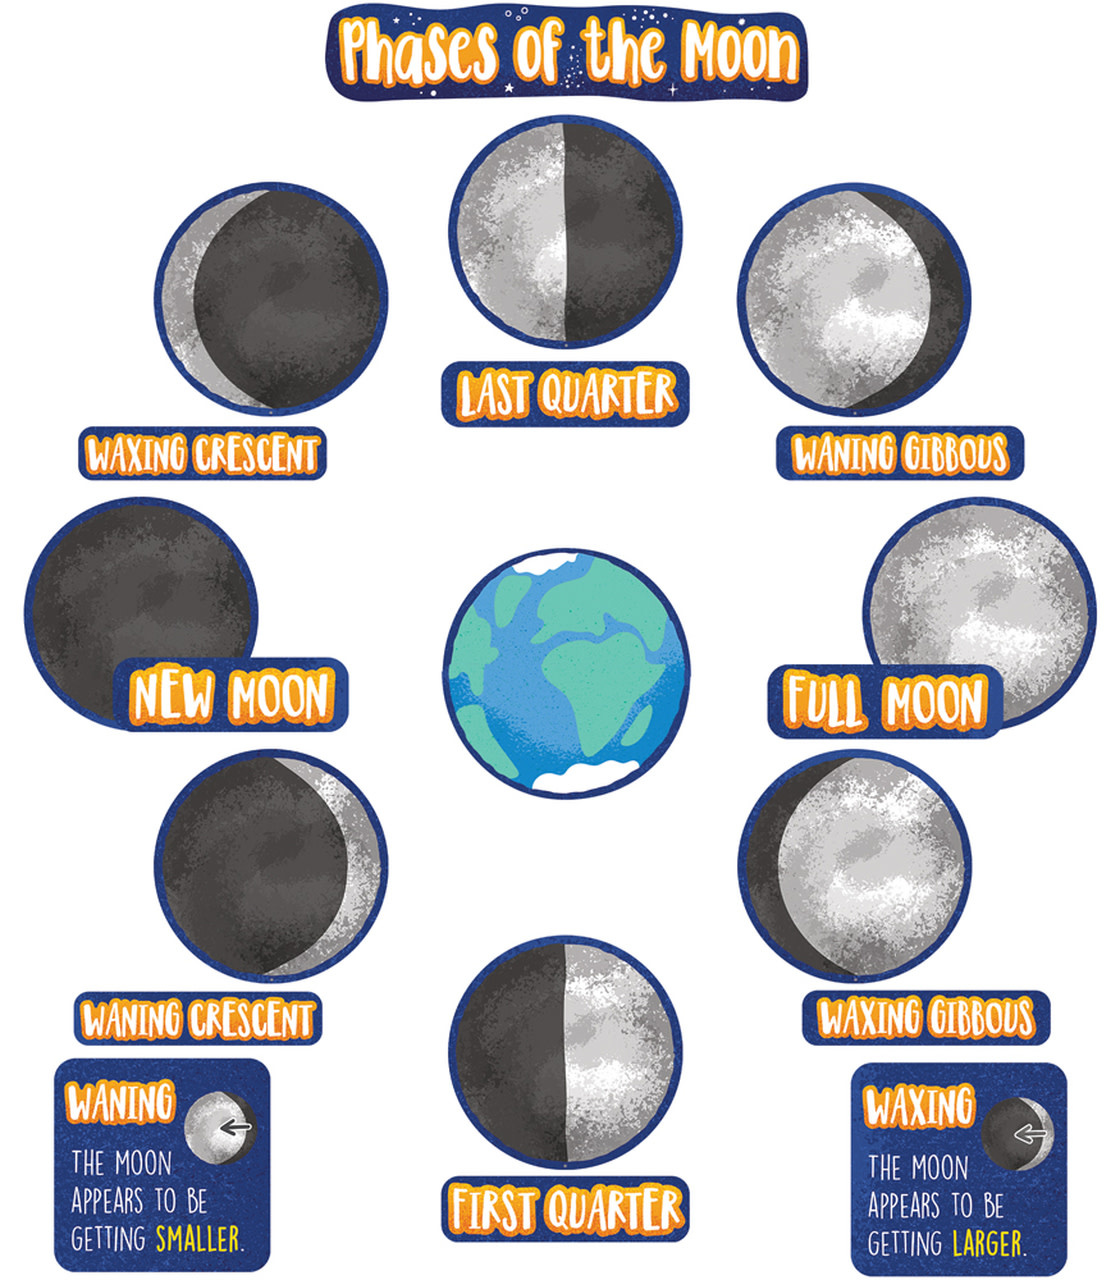 Phases of the Moon Mini Bulletin Board - Tools 4 Teaching